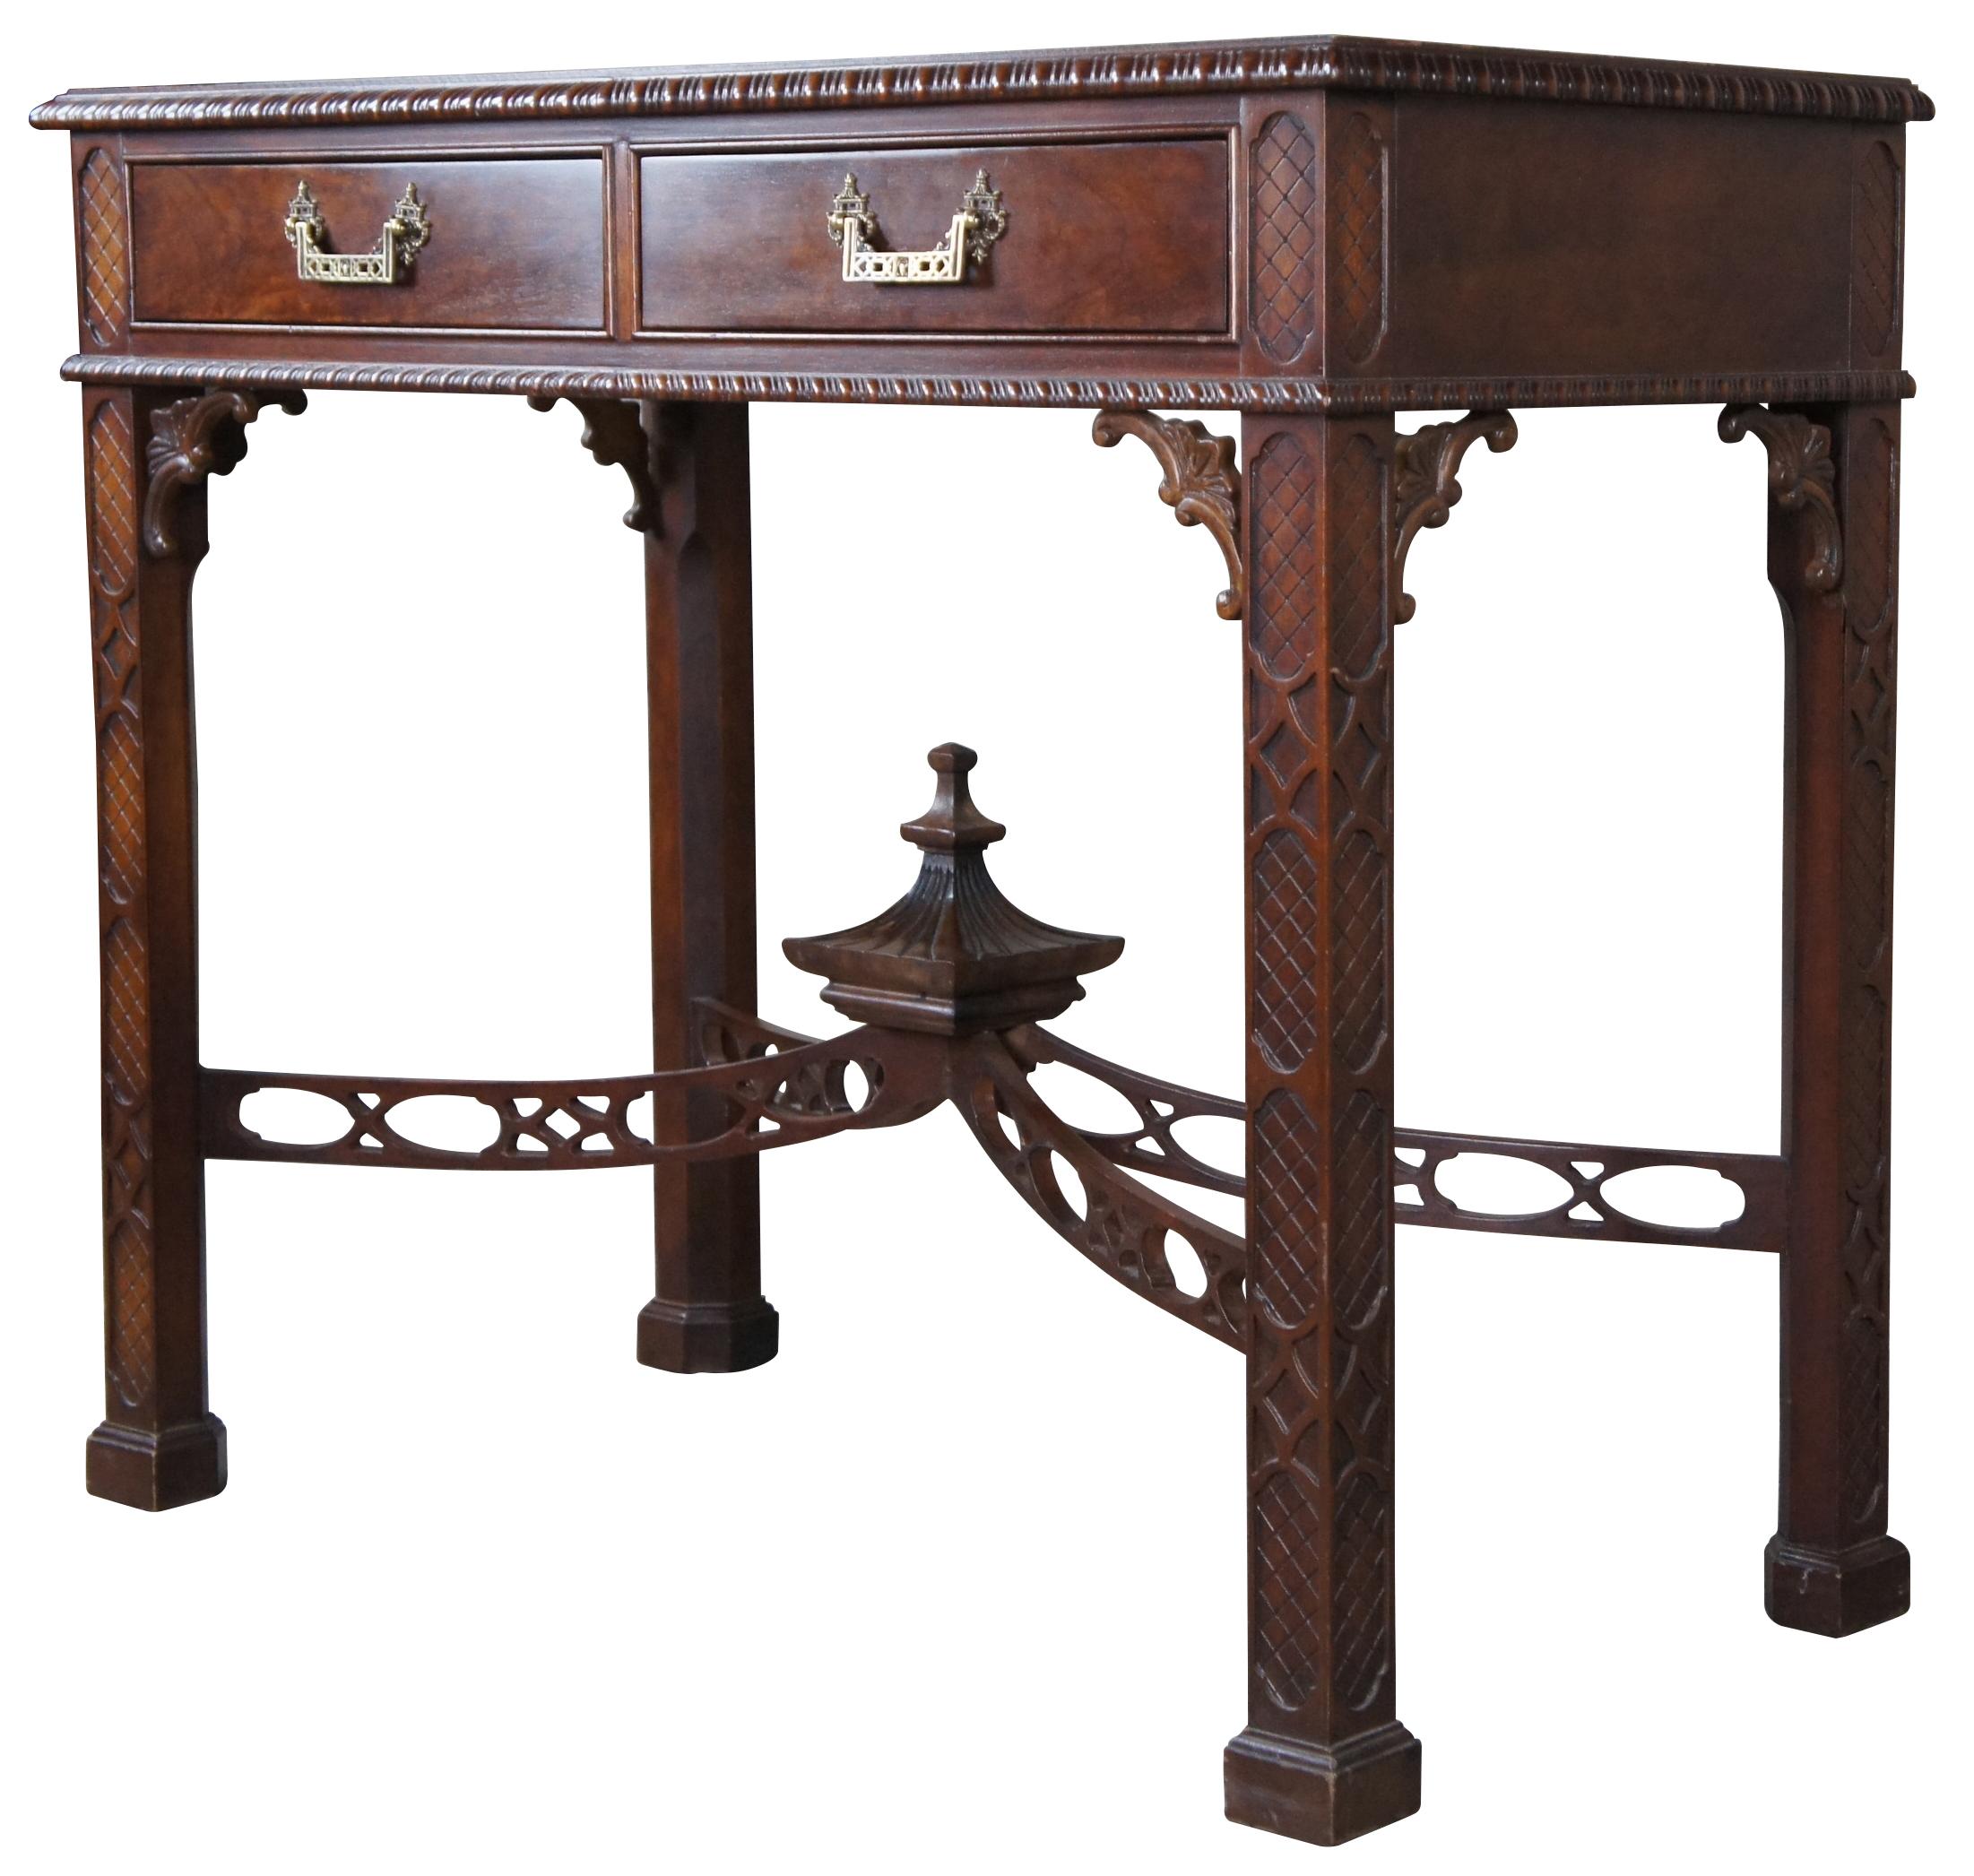 Mid 20th Century Chinese Chippendale Console table or server. A rectangular form made mahogany with two dovetailed drawers and pagoda form hardware.  Features gadrooned aprons, ornate spandrals and lattice carved stiles and legs.   The table is